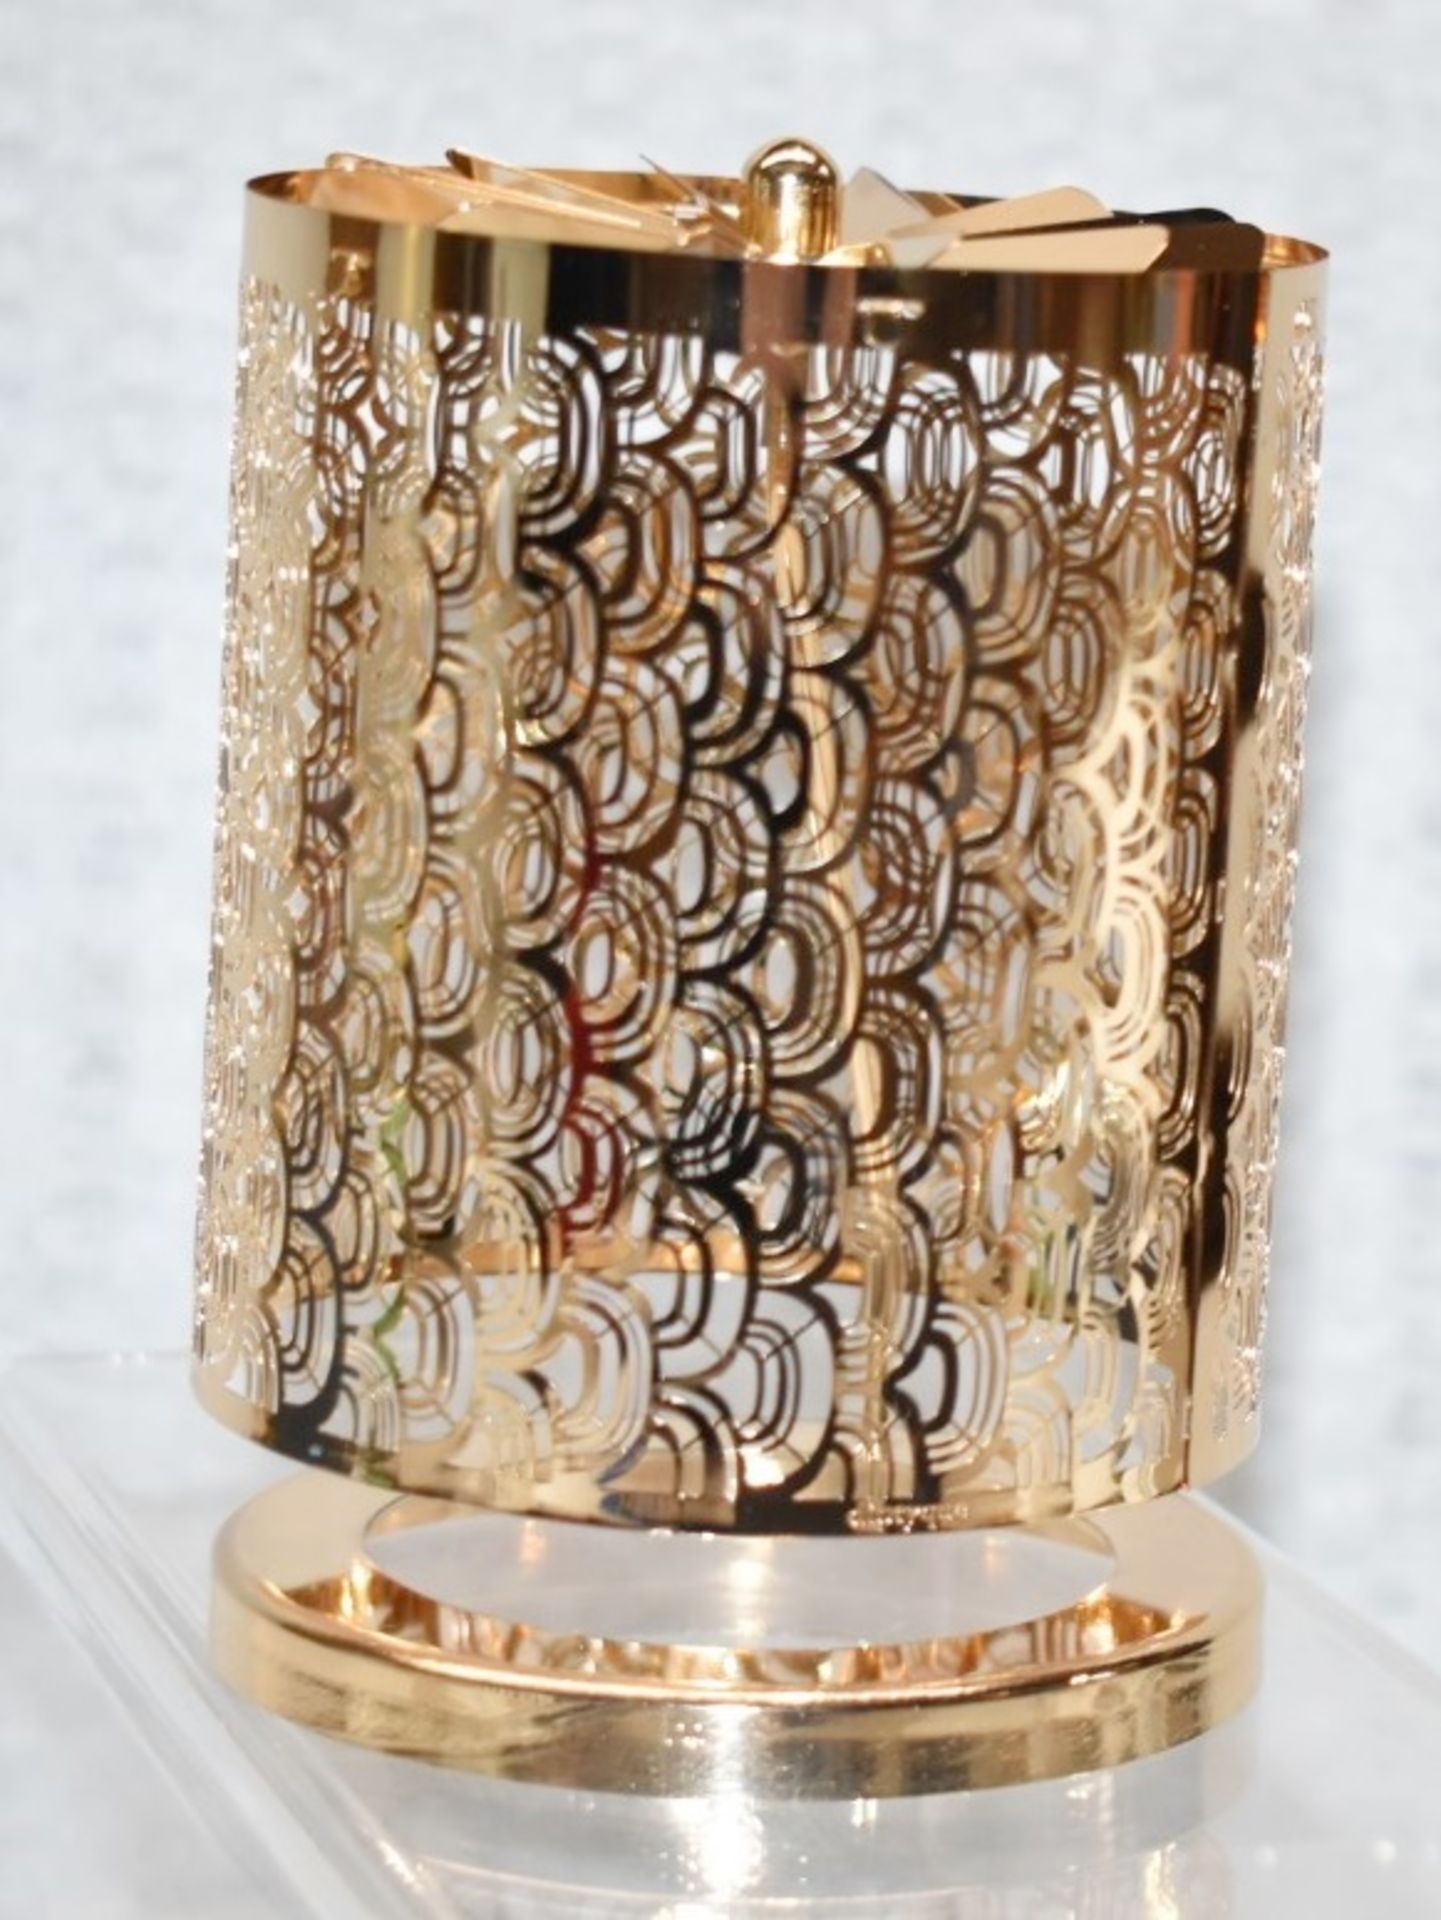 1 x DIPTYQUE Le Redouté Candle Mounted Lantern - Original Price £73.00 - Unused Boxed Stock - Ref: - Image 3 of 5